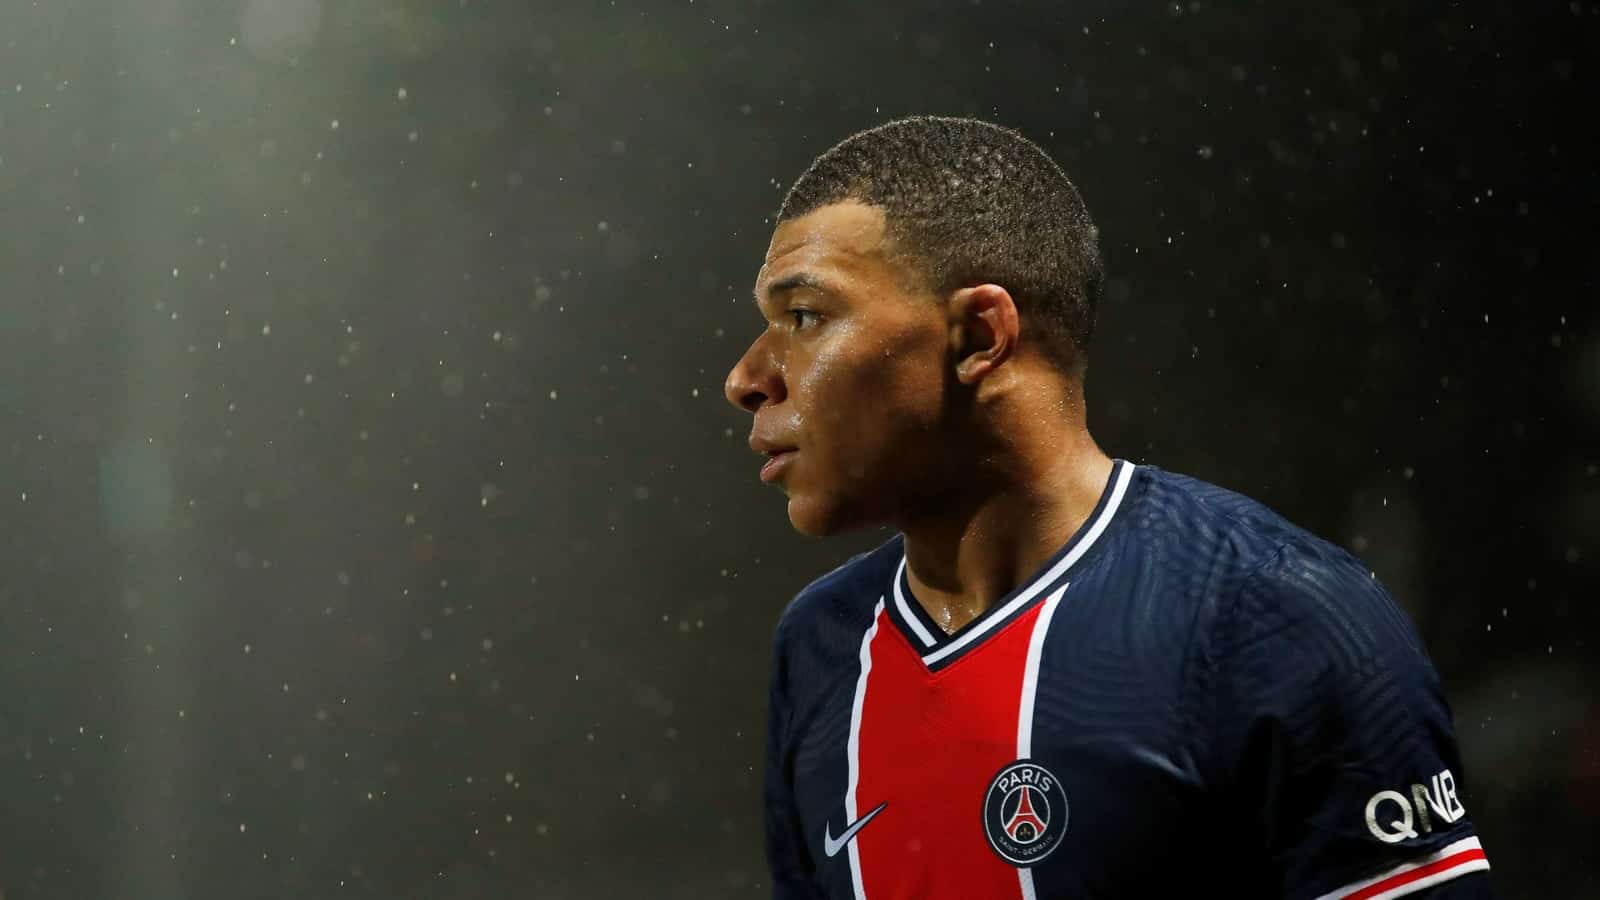 Mbappe committed to PSG, says Pochettino